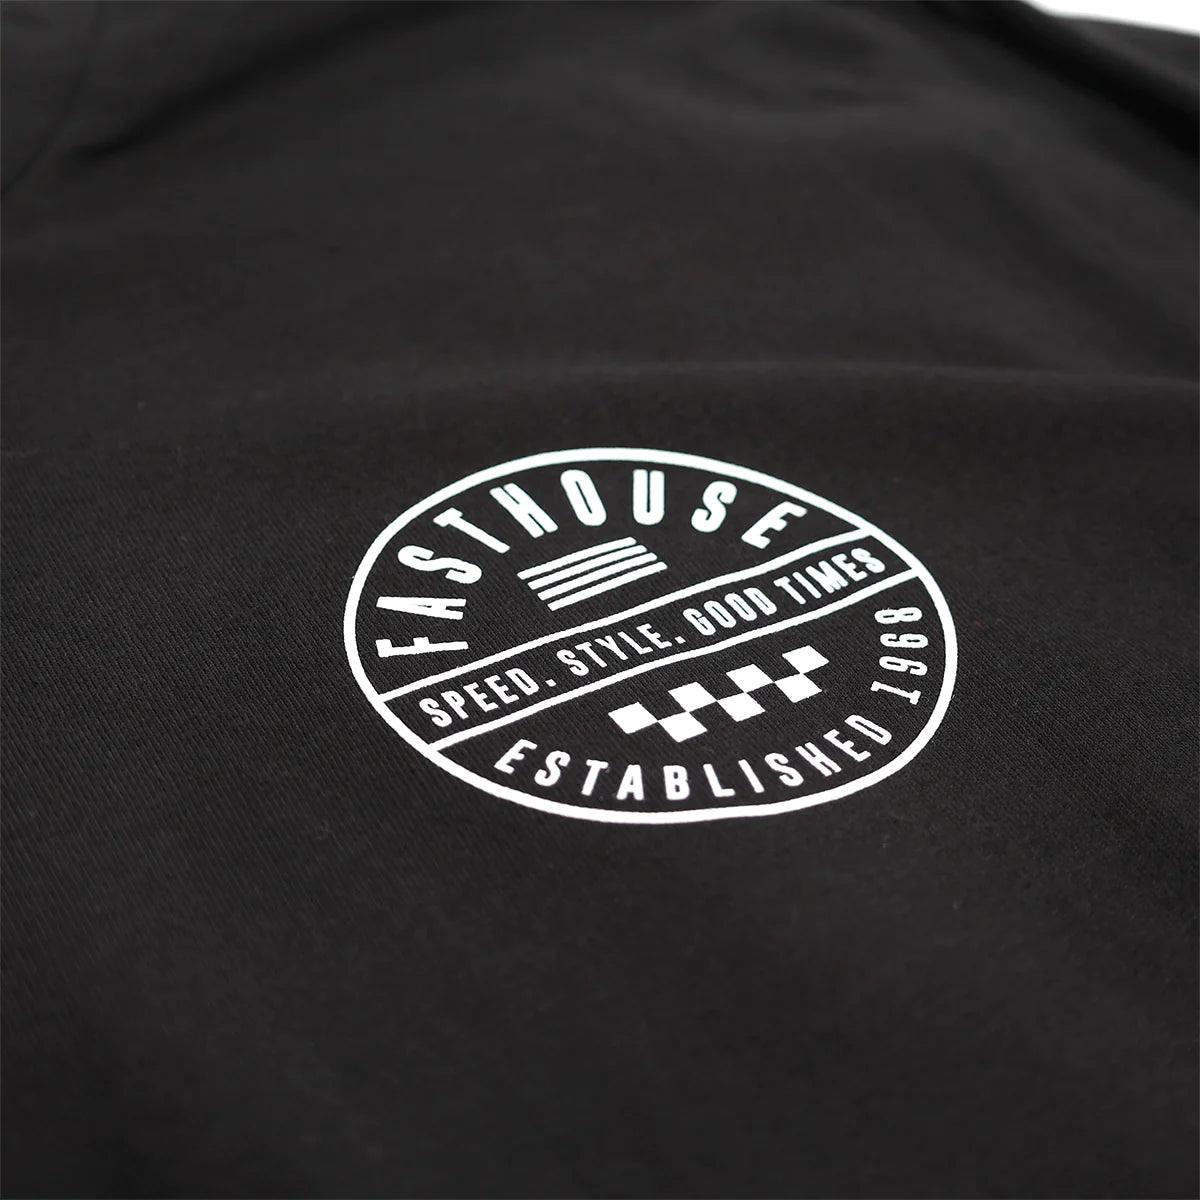 Statement L/S Tee - Black - Purpose-Built / Home of the Trades